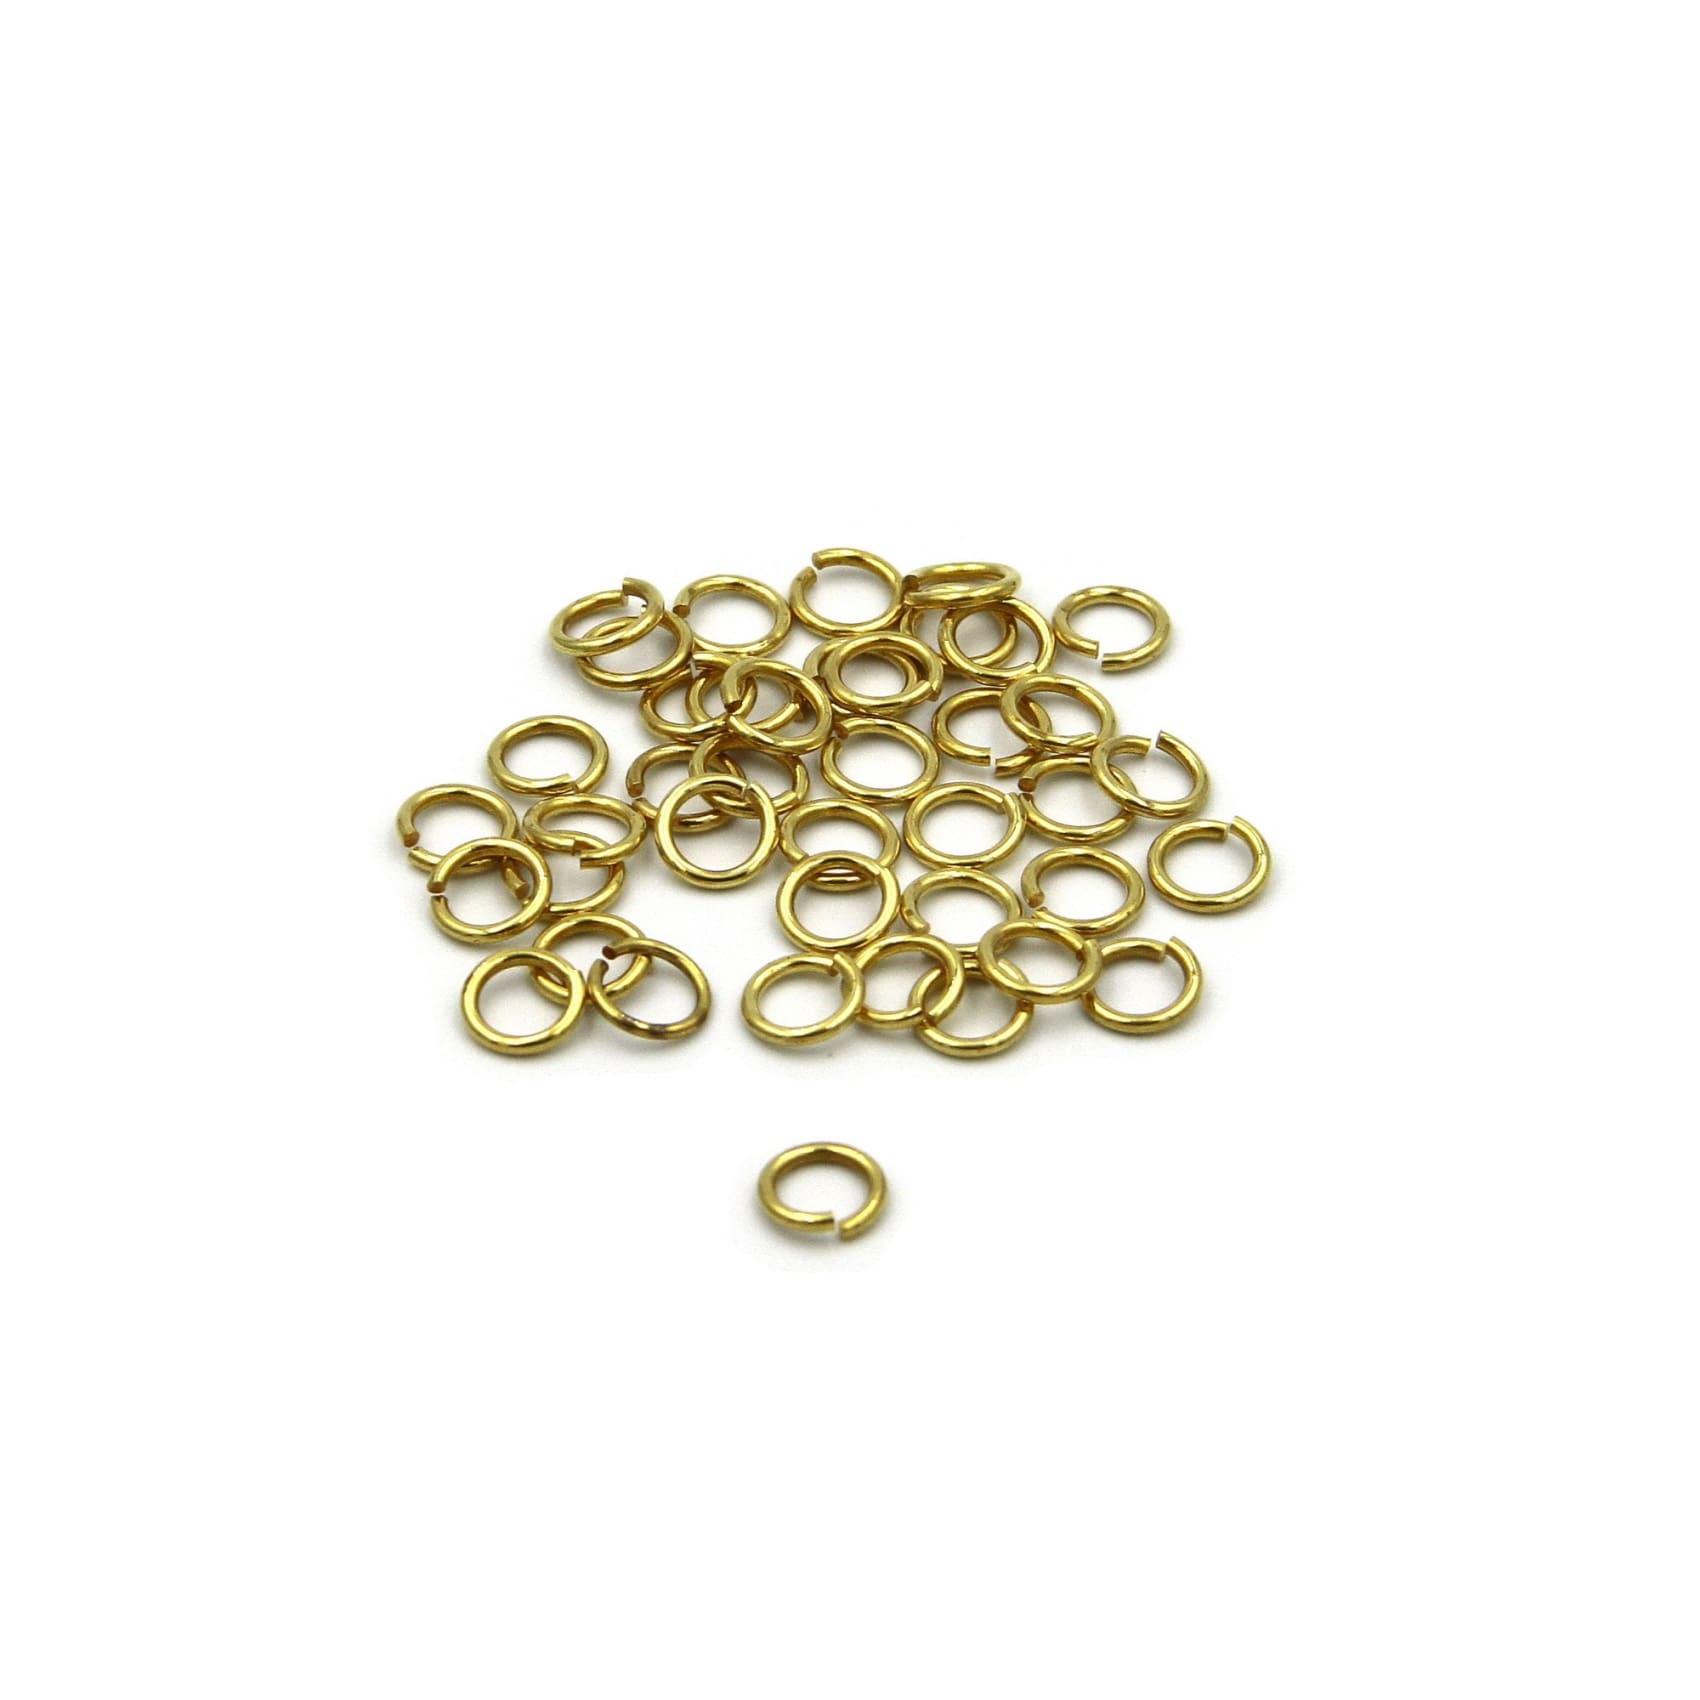 300pcs Mix 8mm 9mm 10mm Stainless Steel Thick Strong Rings Jump Rings  Connector Rings for Jewelry Making Necklaces Bracelet Earrings Keychain DIY  Craft (M536) : Amazon.in: Home & Kitchen